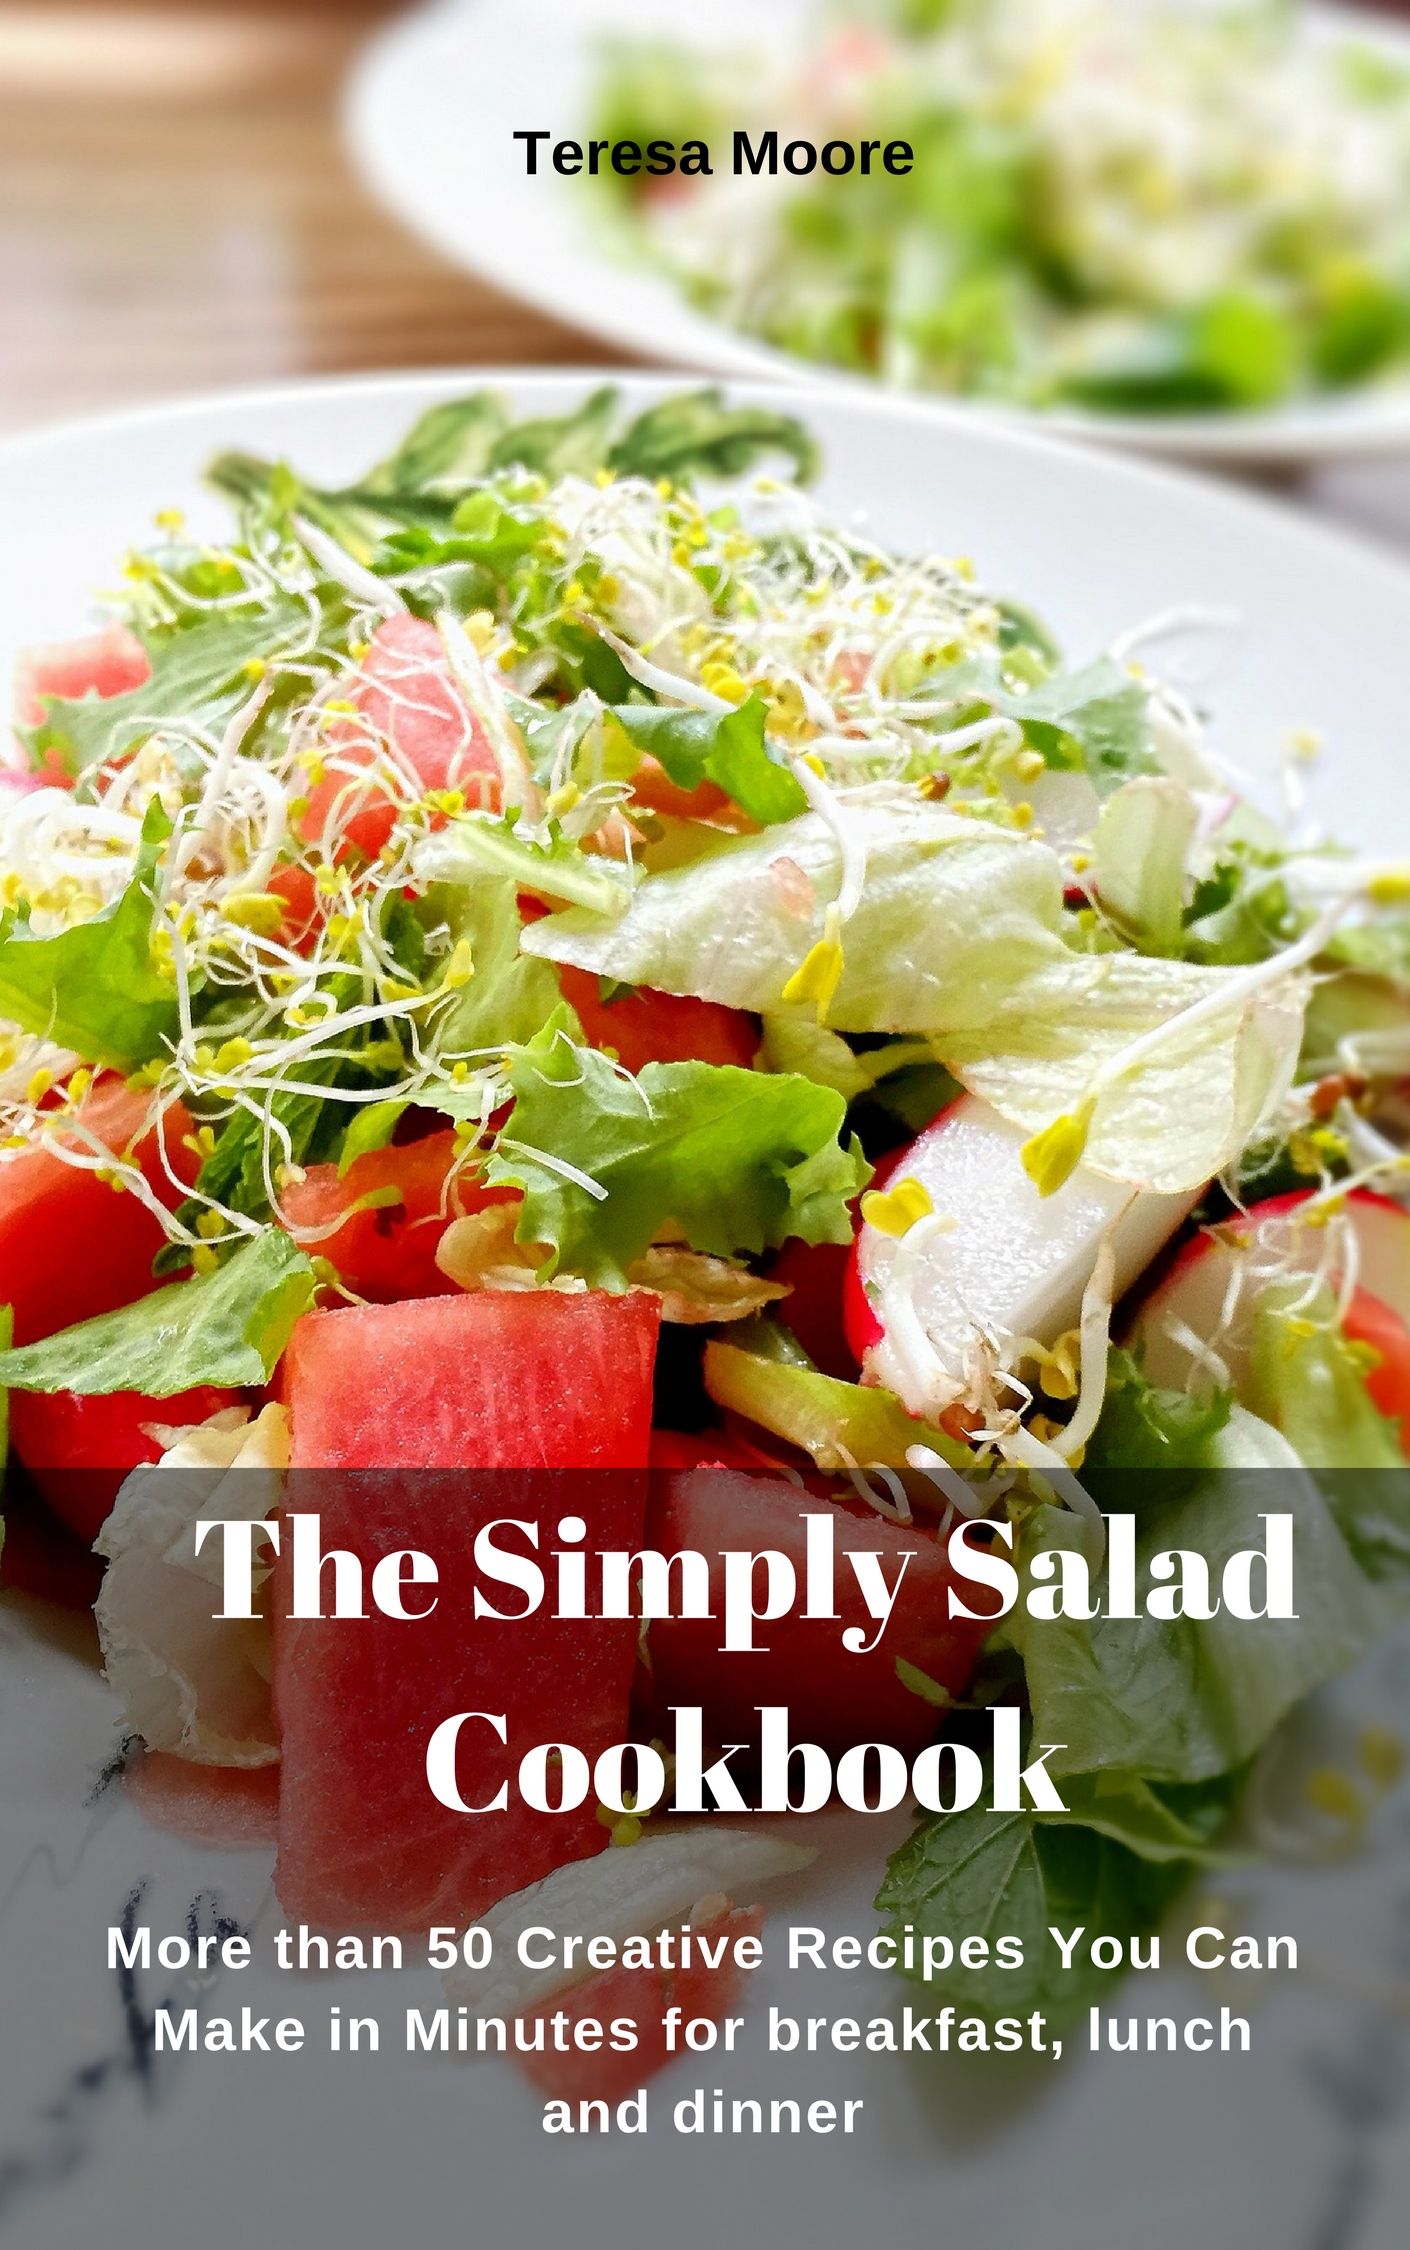 FREE: The Simply Salad Cookbook: More than 50 Creative Recipes You Can Make in Minutes for breakfast, lunch and dinner by Teresa Moore